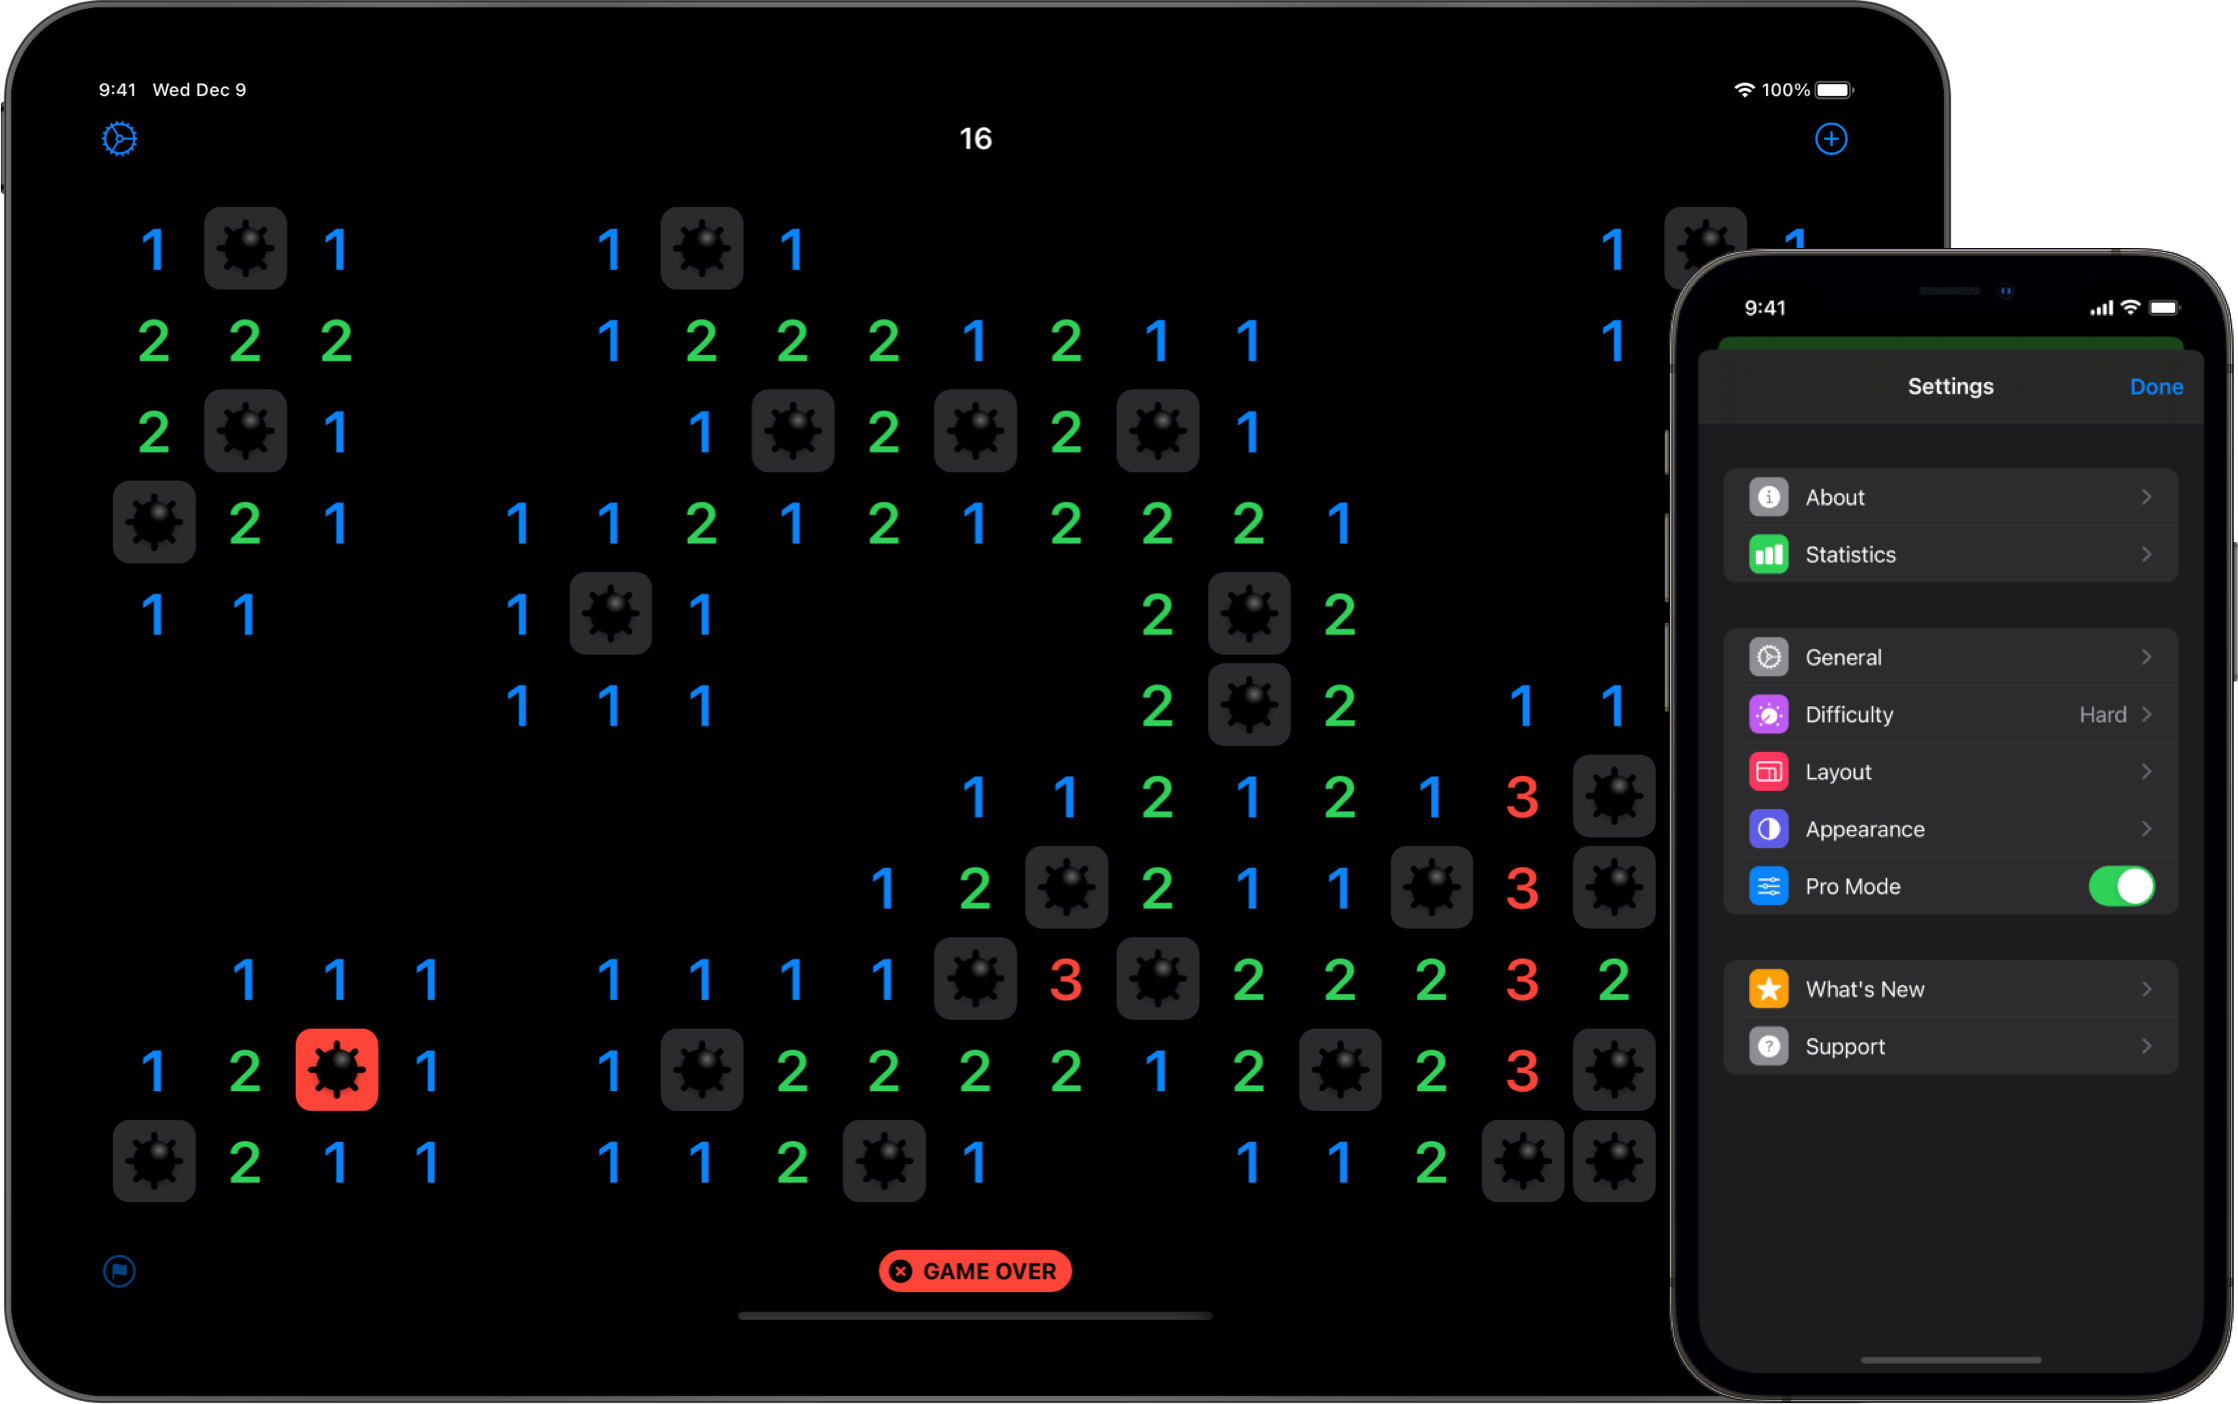 Minesweeper open on iPad and FreeCell Settings open on iPhone